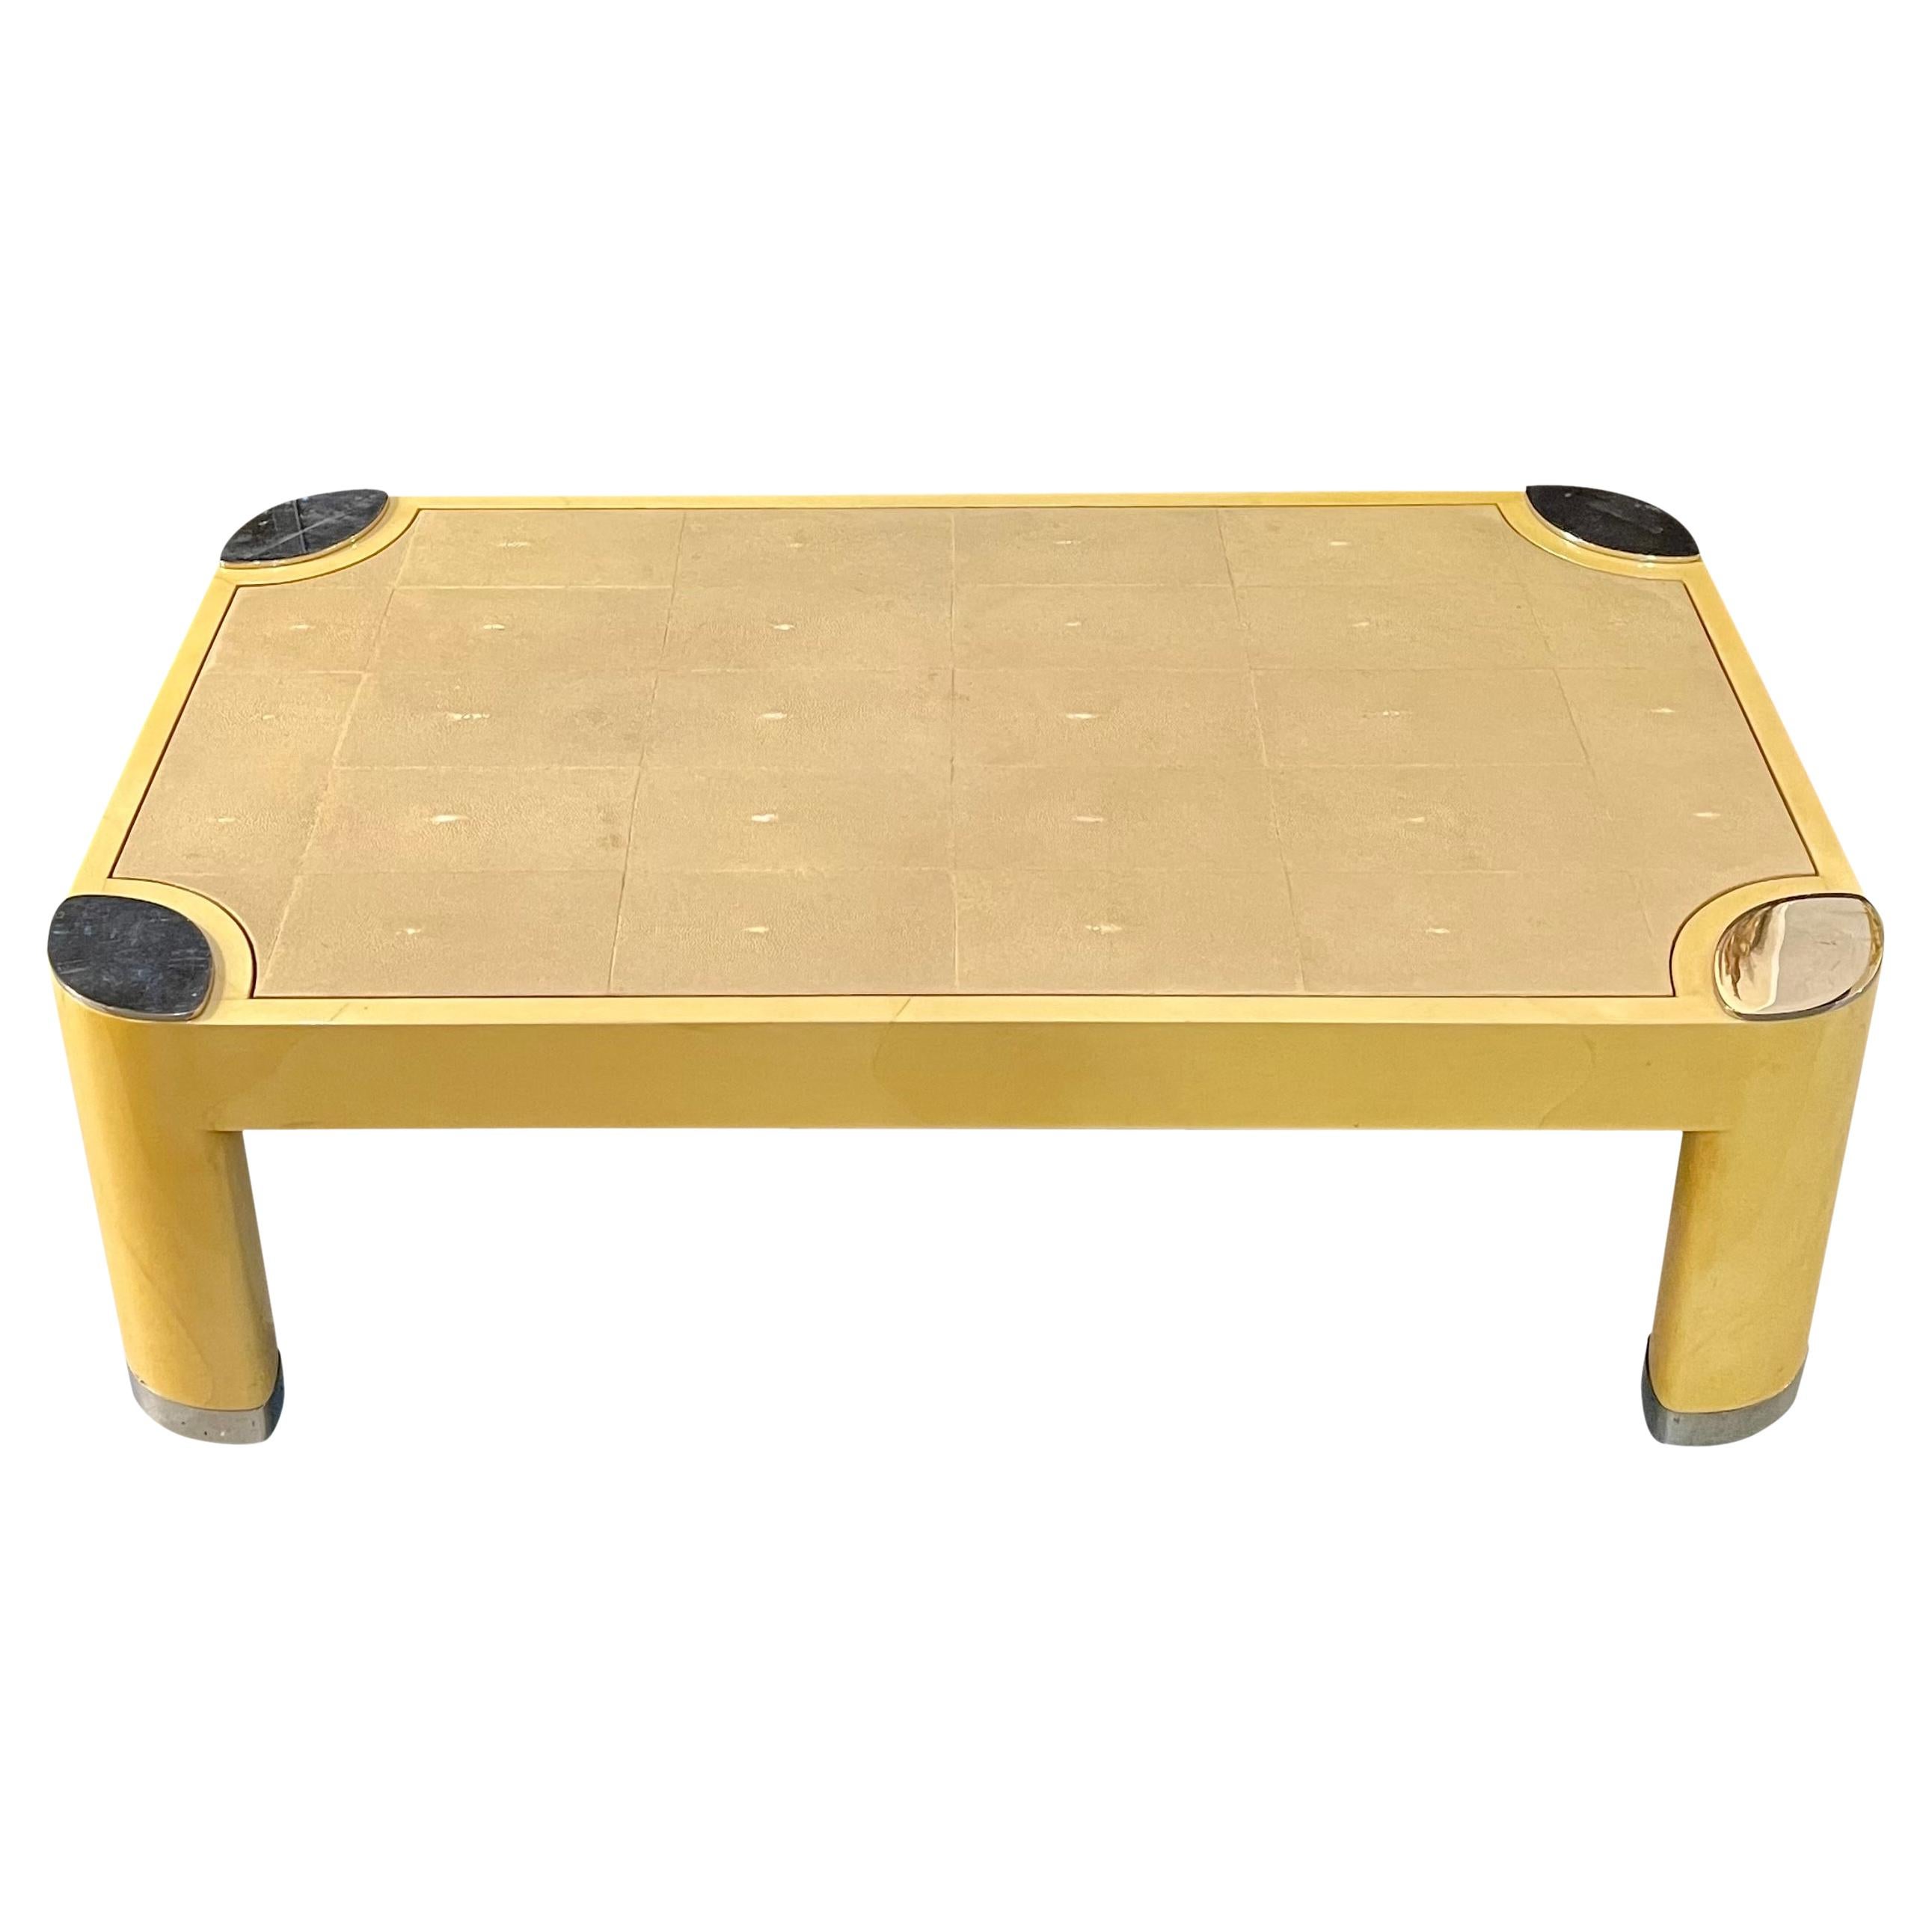 Ron Seff Oval Leg Cocktail Table in Lacquered Parchment Framing a Shagreen Top For Sale